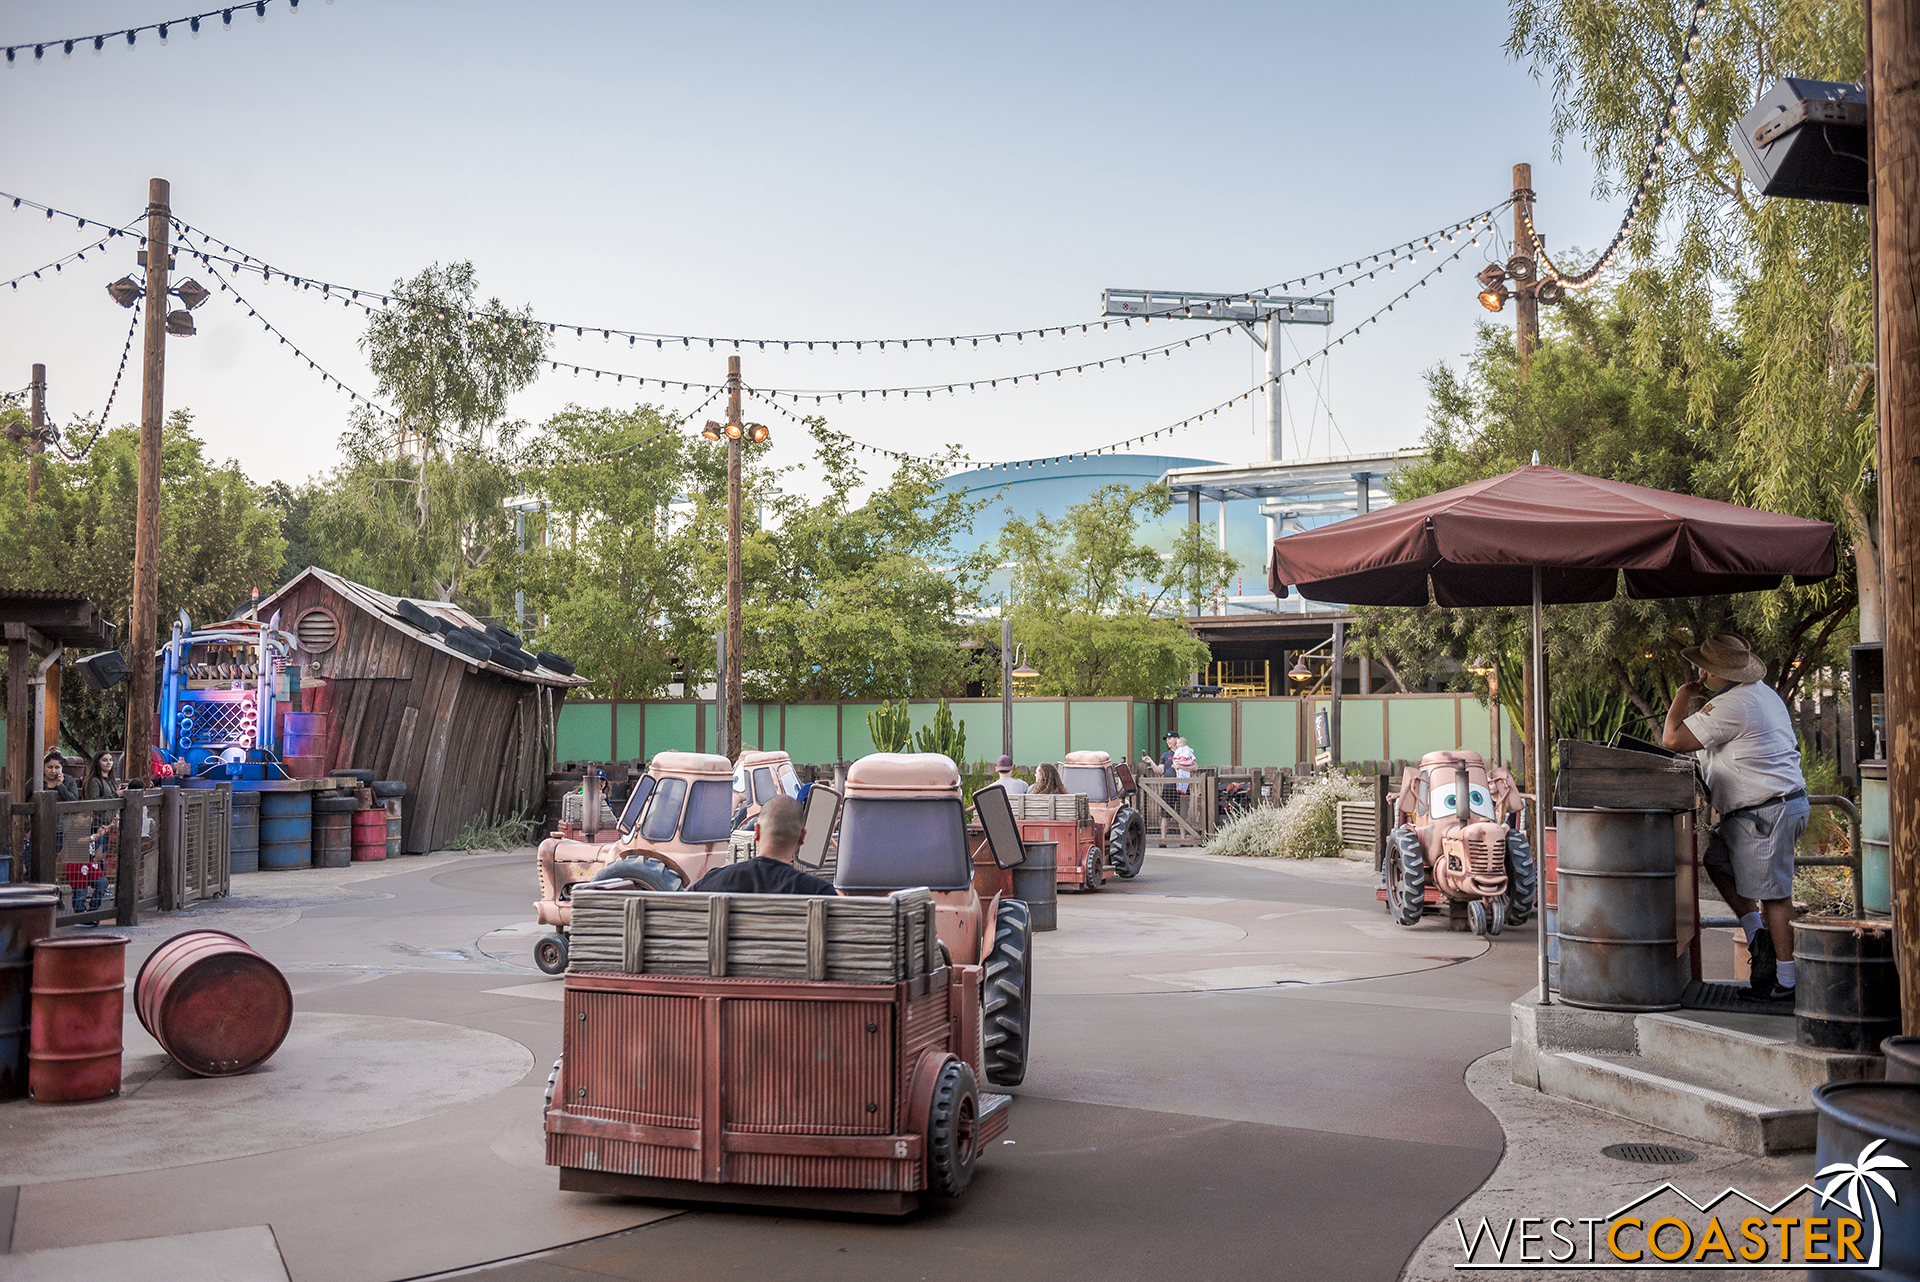  It’s pretty visible from next door Cars Land.  I’m interested in how they deal with land sightlines and transitions. 